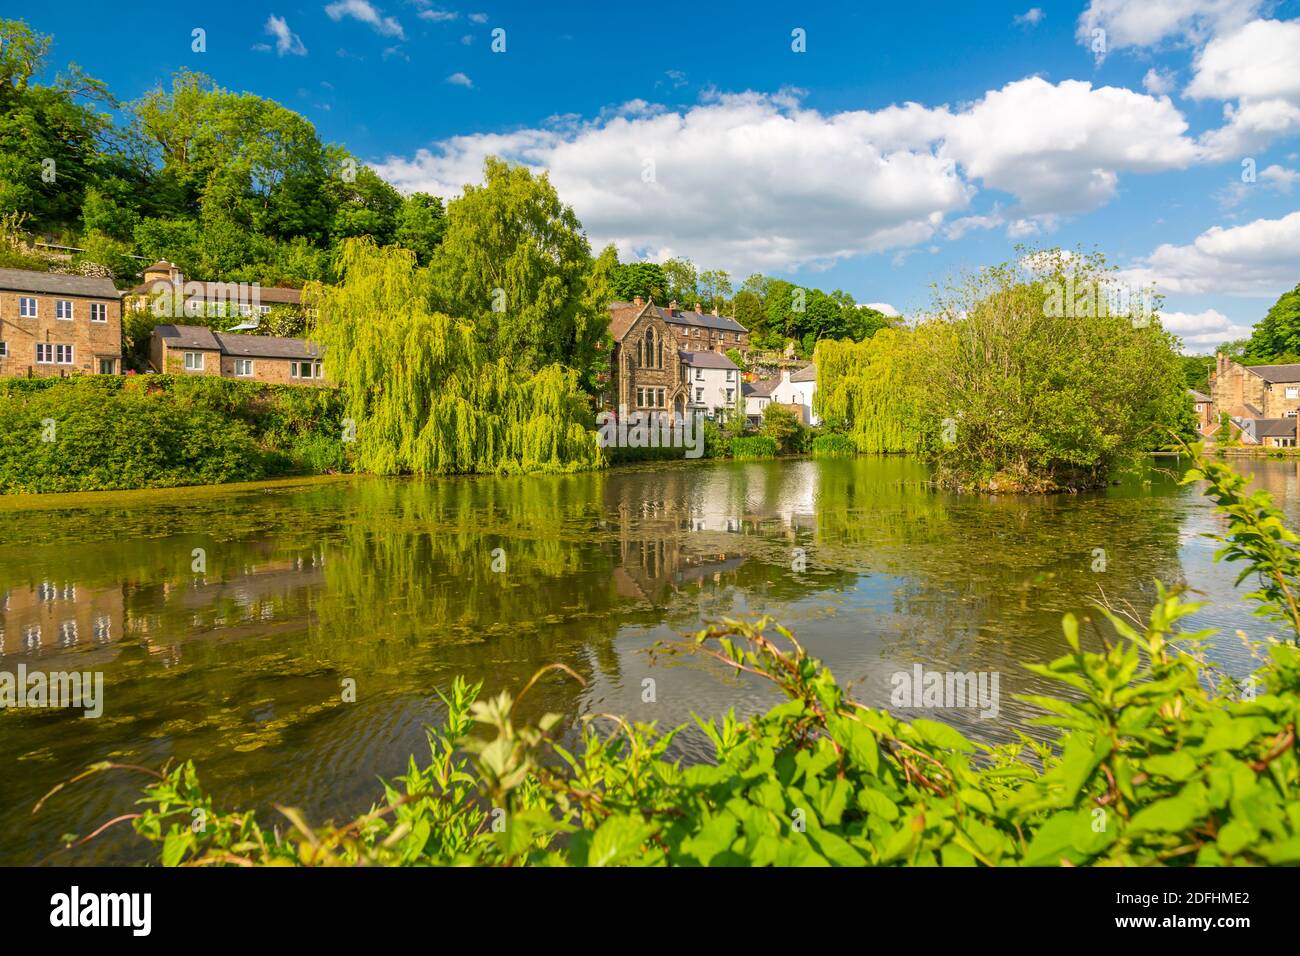 View of reflections in Cromford pond, Cromford, Derbyshire Dales, Derbyshire, England, United Kingdom, Europe Stock Photo